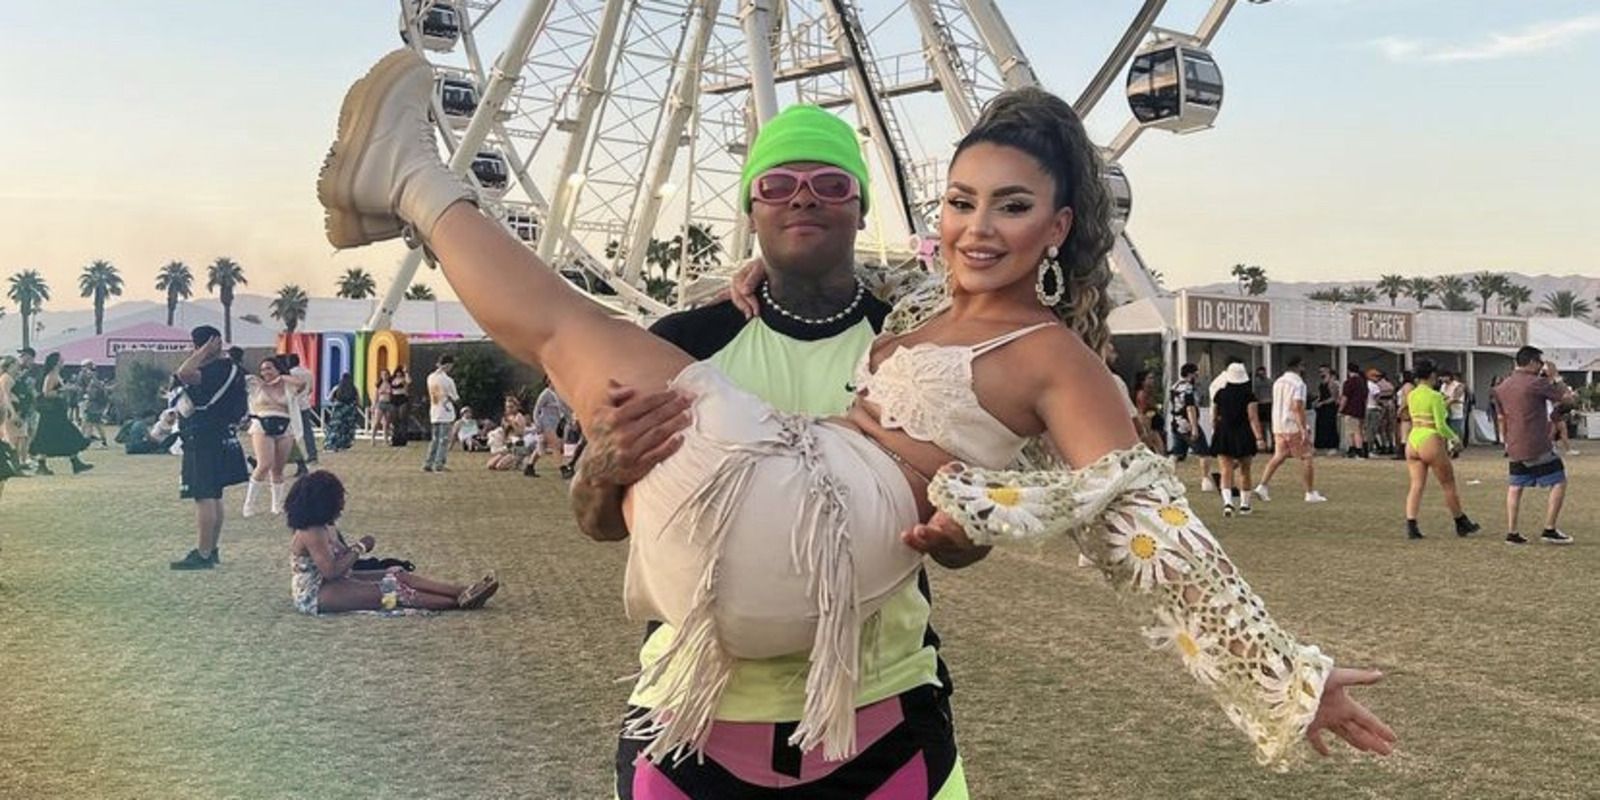 Jibri and Miona Bell from 90 Day Fiancé at coachella music feativel in fun outfits smiling